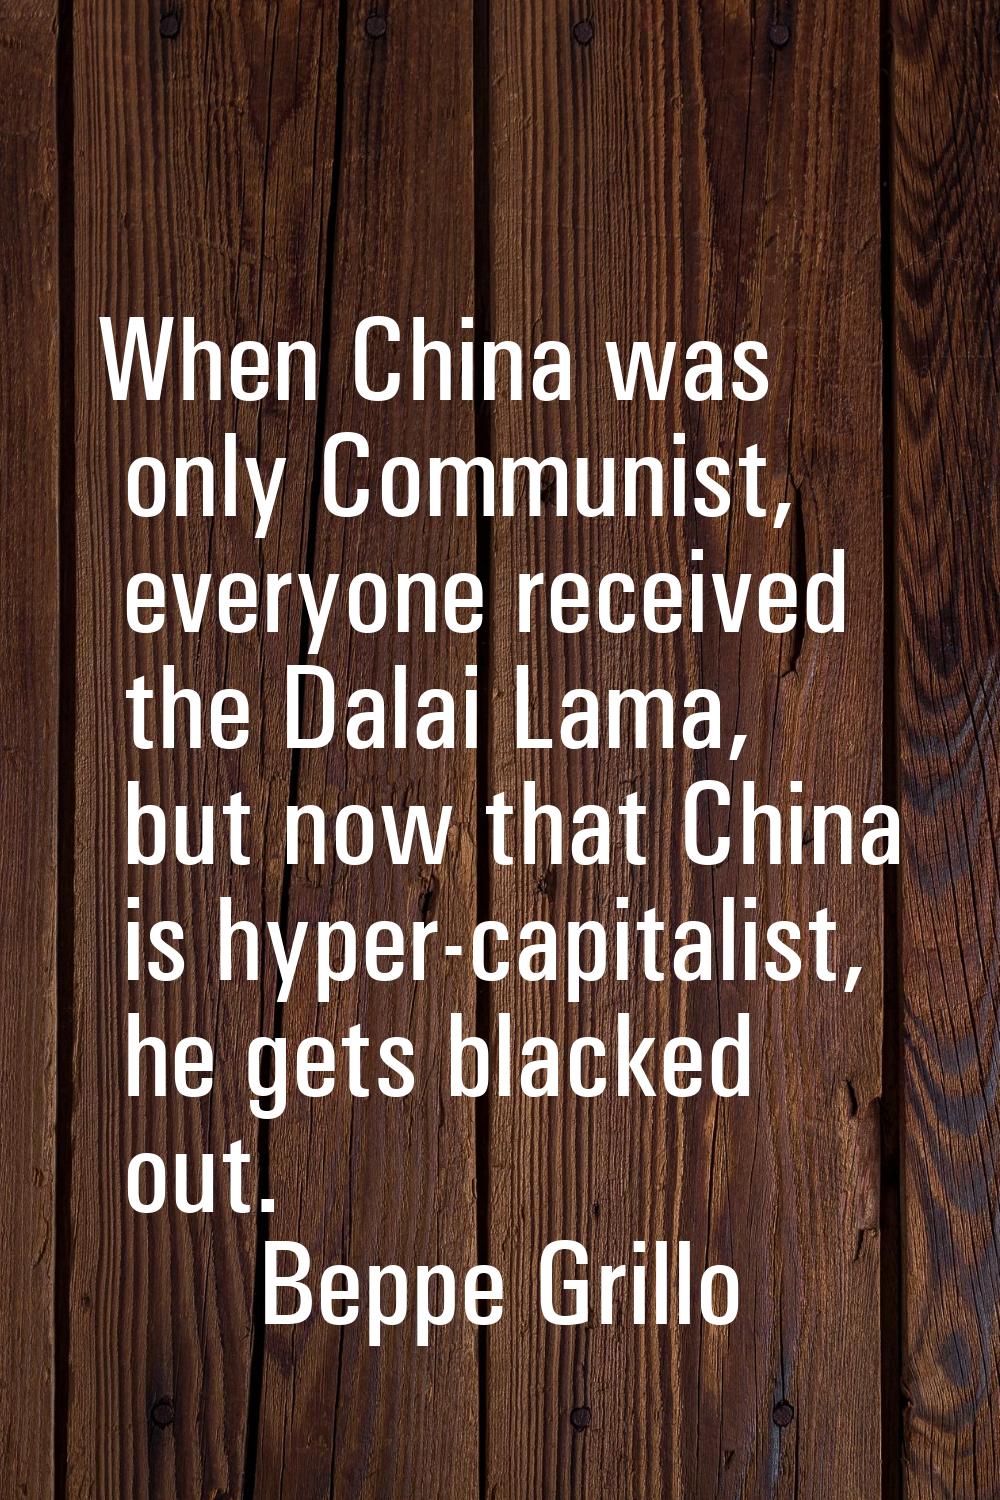 When China was only Communist, everyone received the Dalai Lama, but now that China is hyper-capita